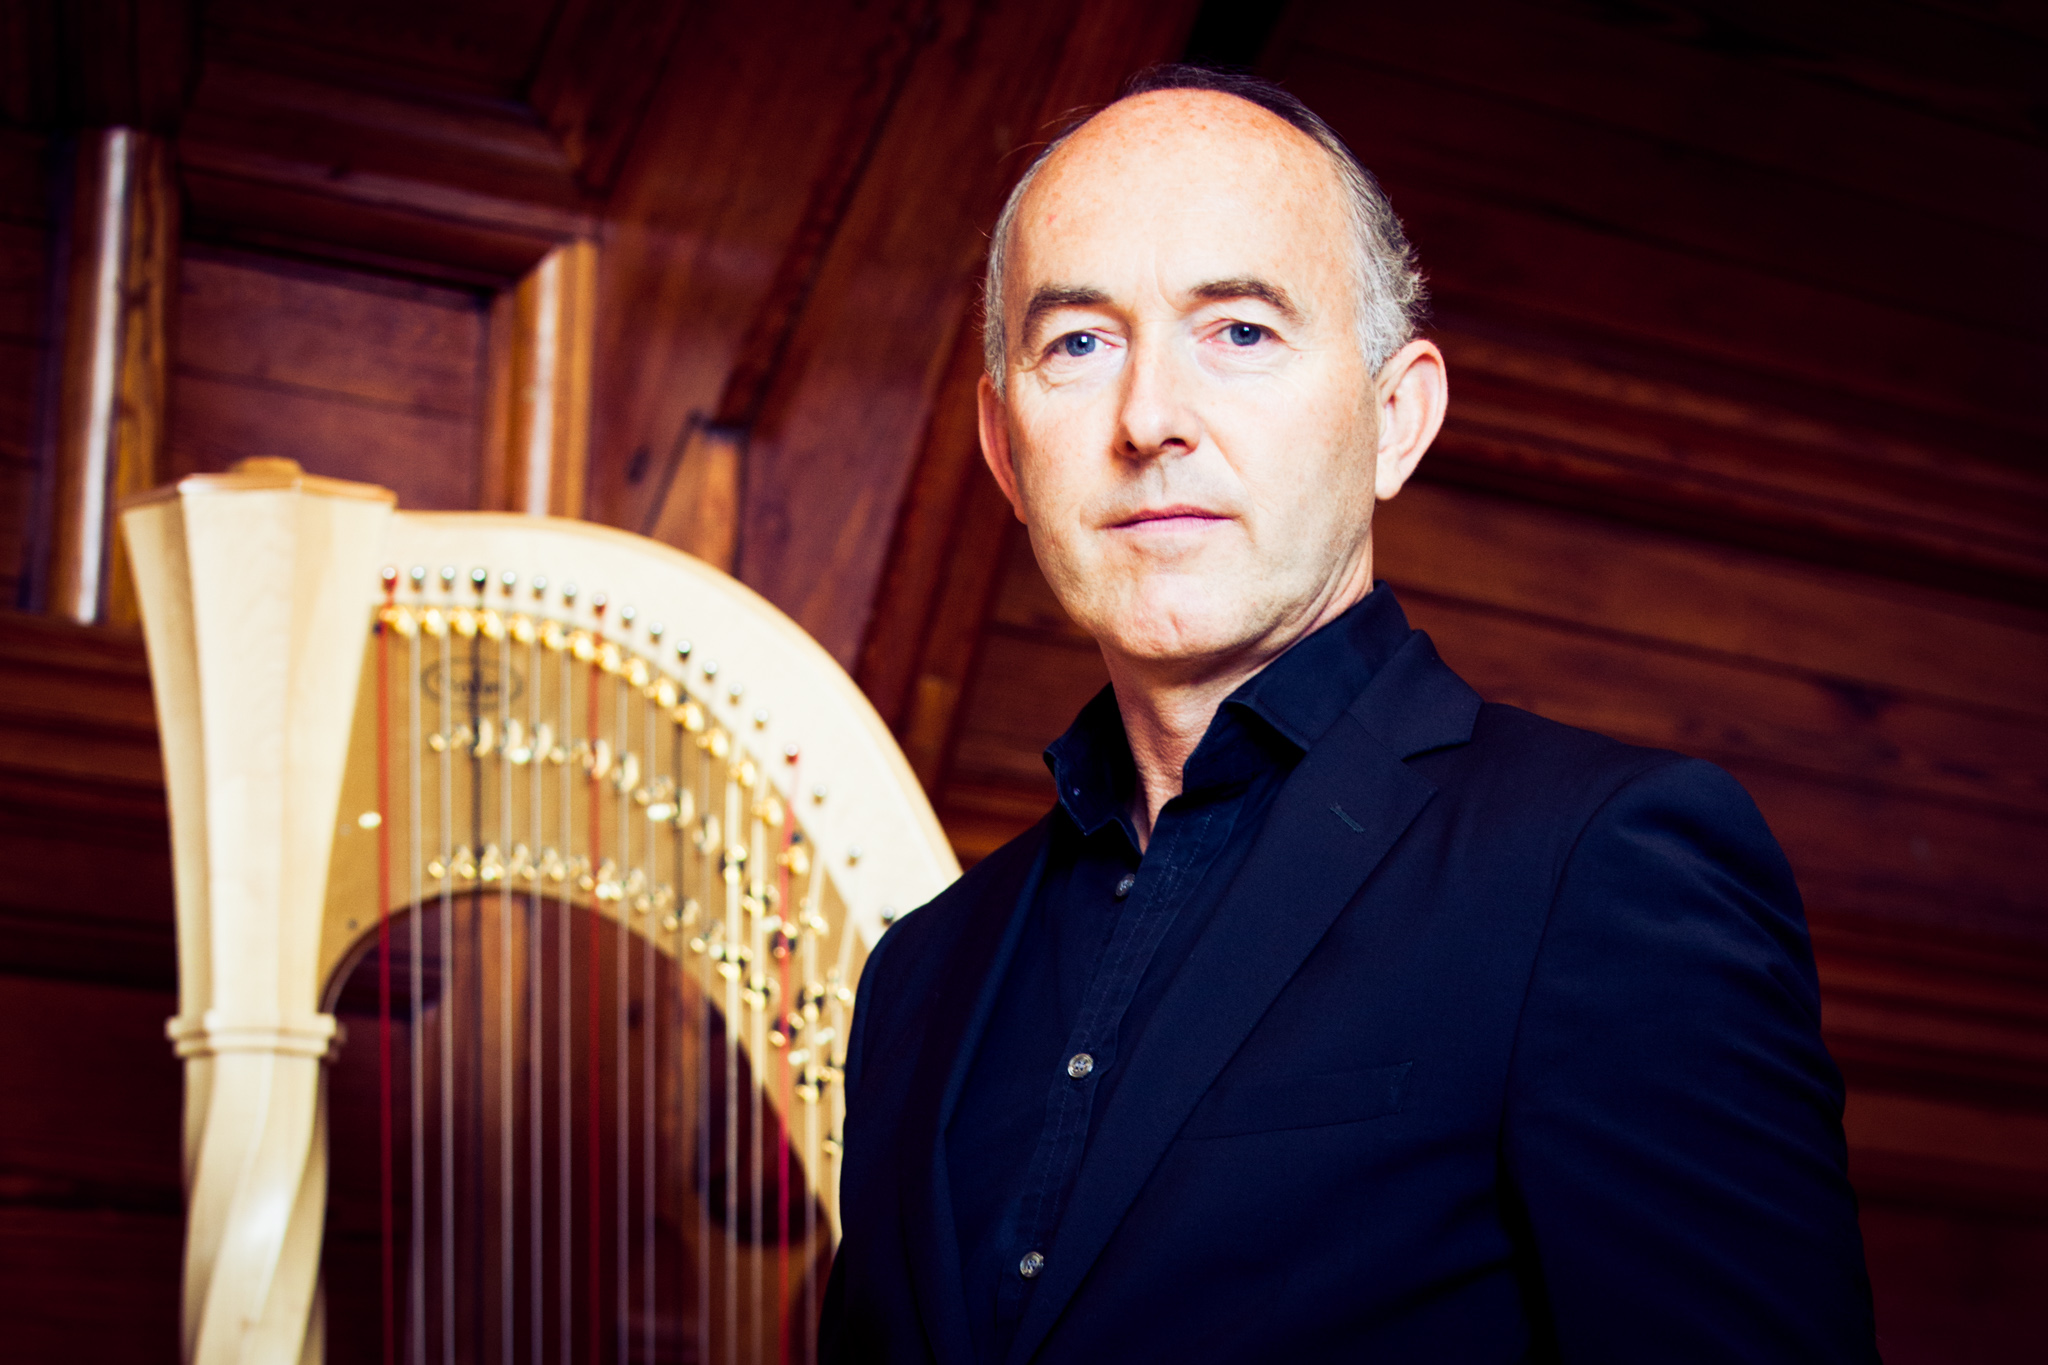 World class harpist returns home to Mid-Wales for solo concert in aid of mental health charity